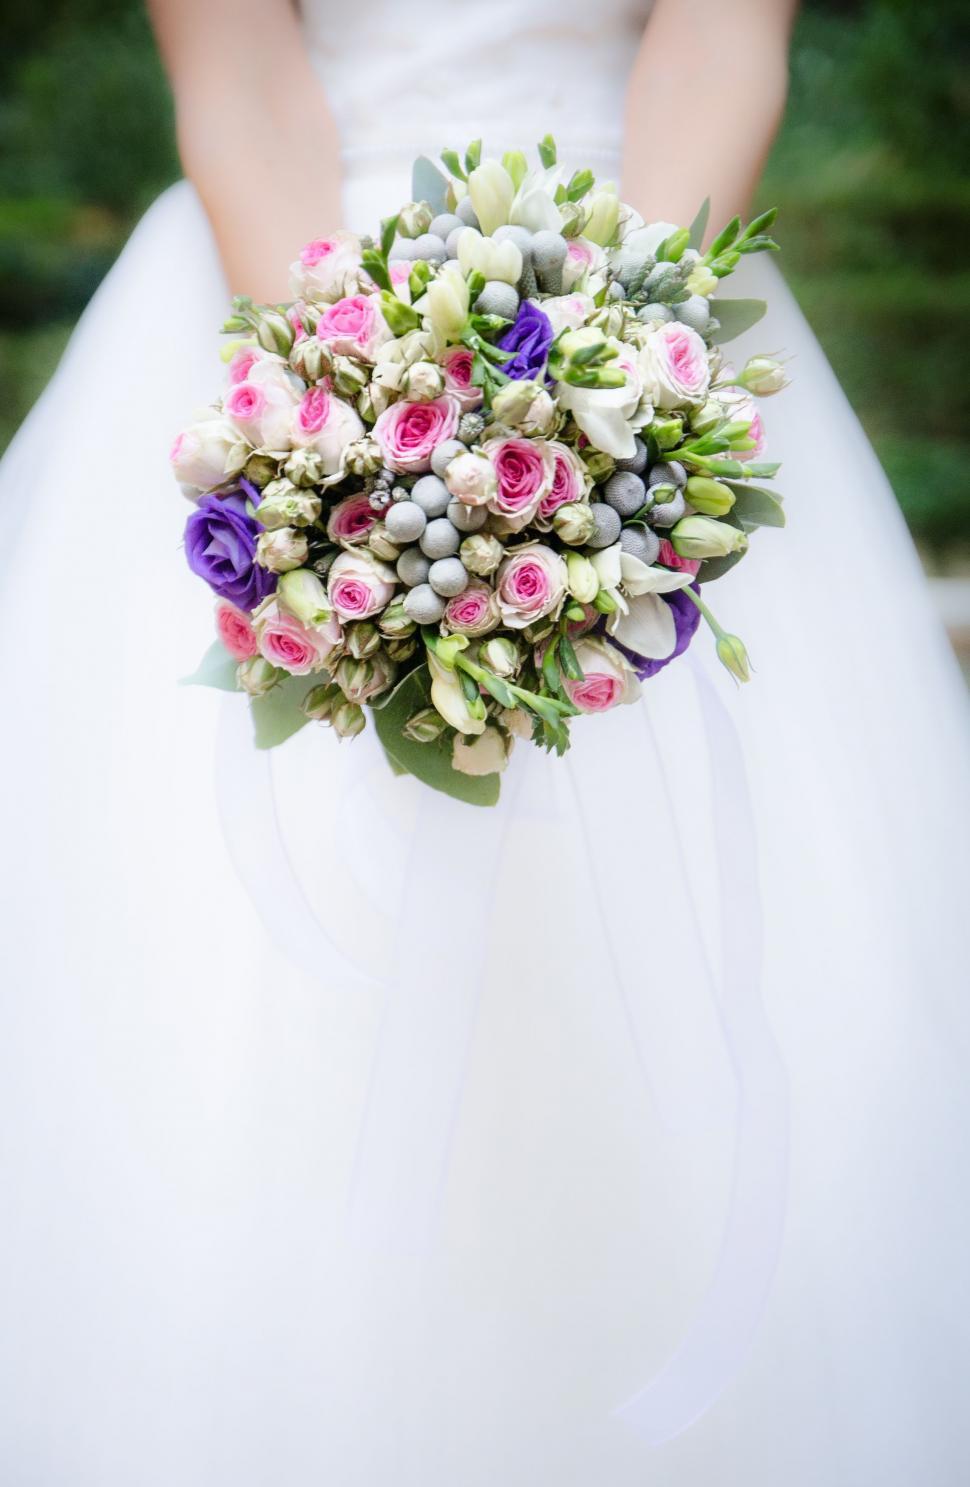 Free Image of Bride Holding Bouquet of Flowers 